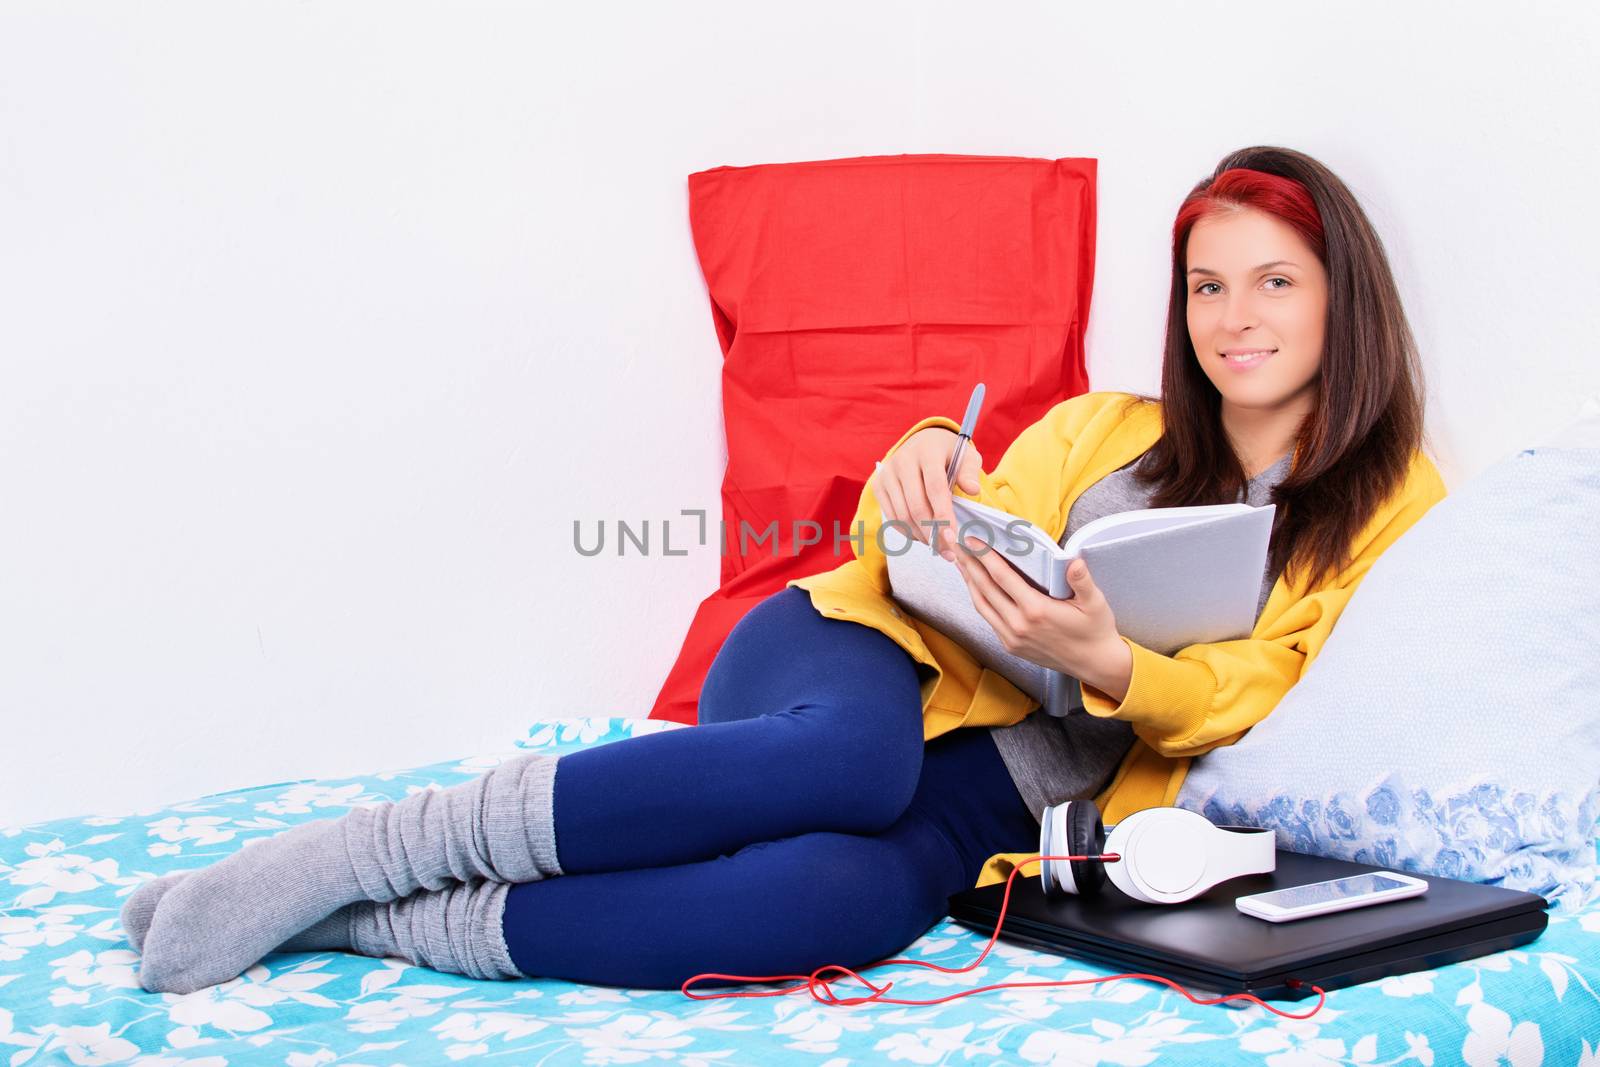 Beautiful young woman sitting comfortably on a bed in her bedroom holding a notebook, smiling and looking at the camera. Smiling girl relaxing in bed and making schedule for tomorrow.